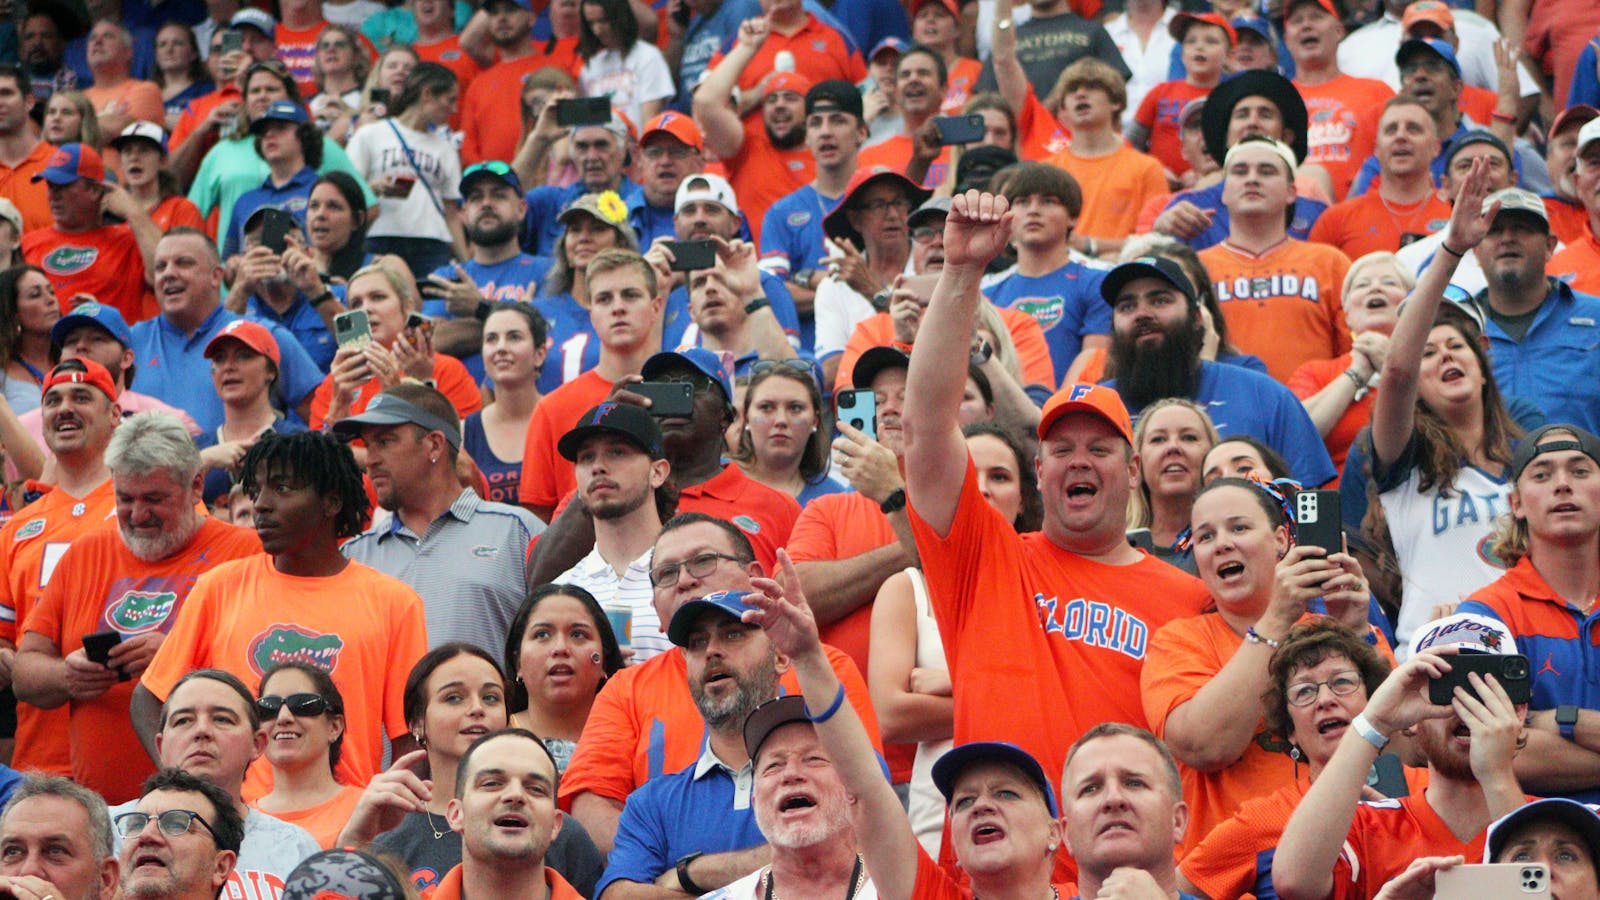 Record-breaking crowds for Gators football home games prompt stadium safety concerns